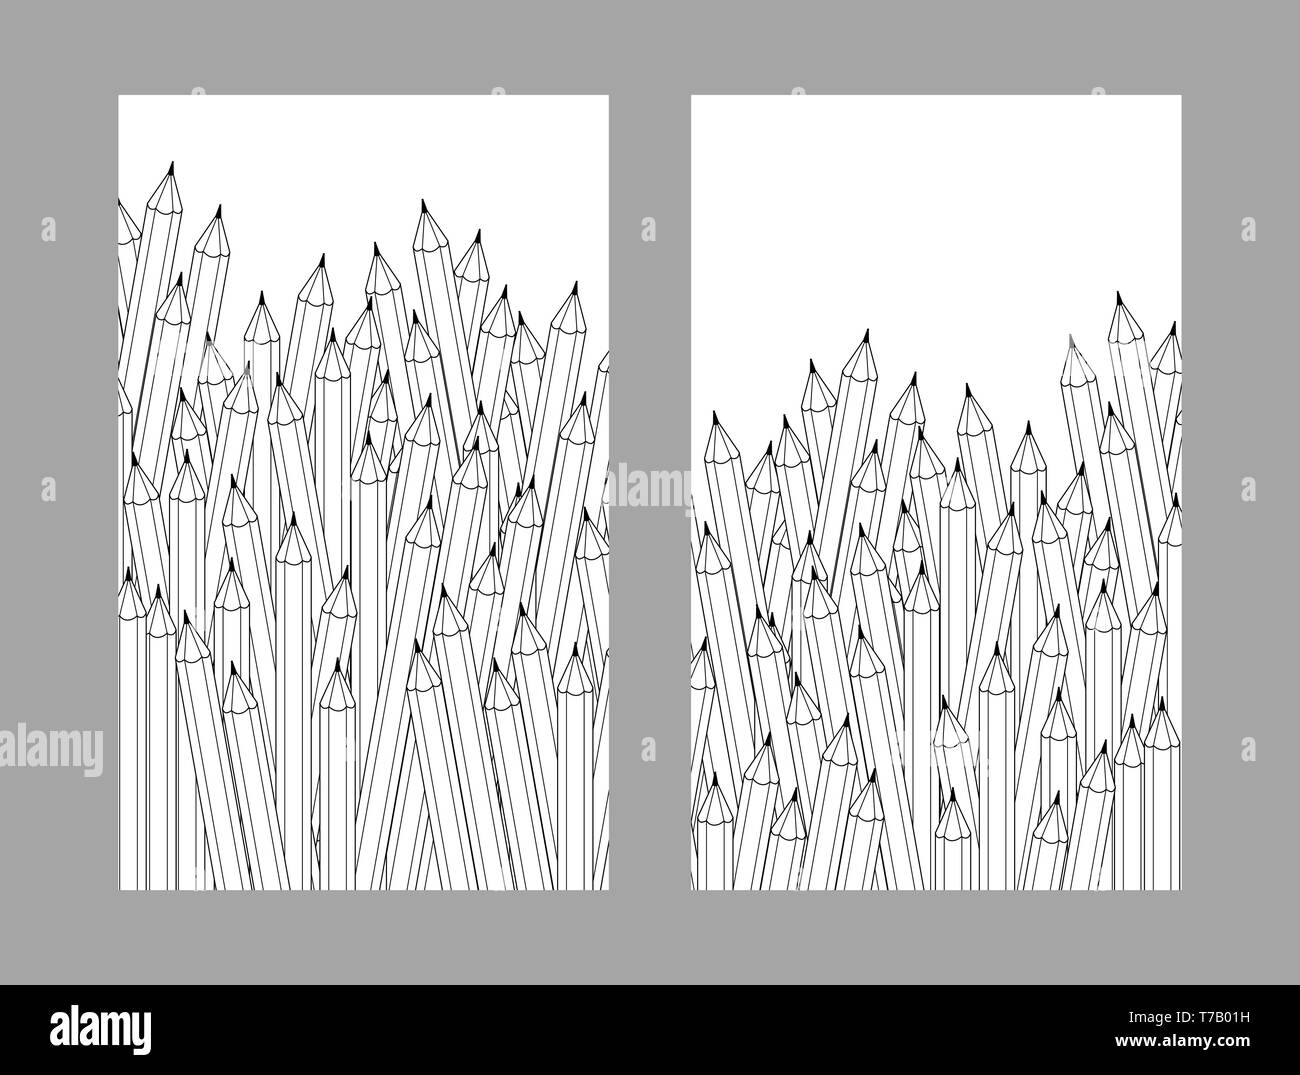 Pencils in outlines. Isolated objects, flyers set for education design Stock Vector